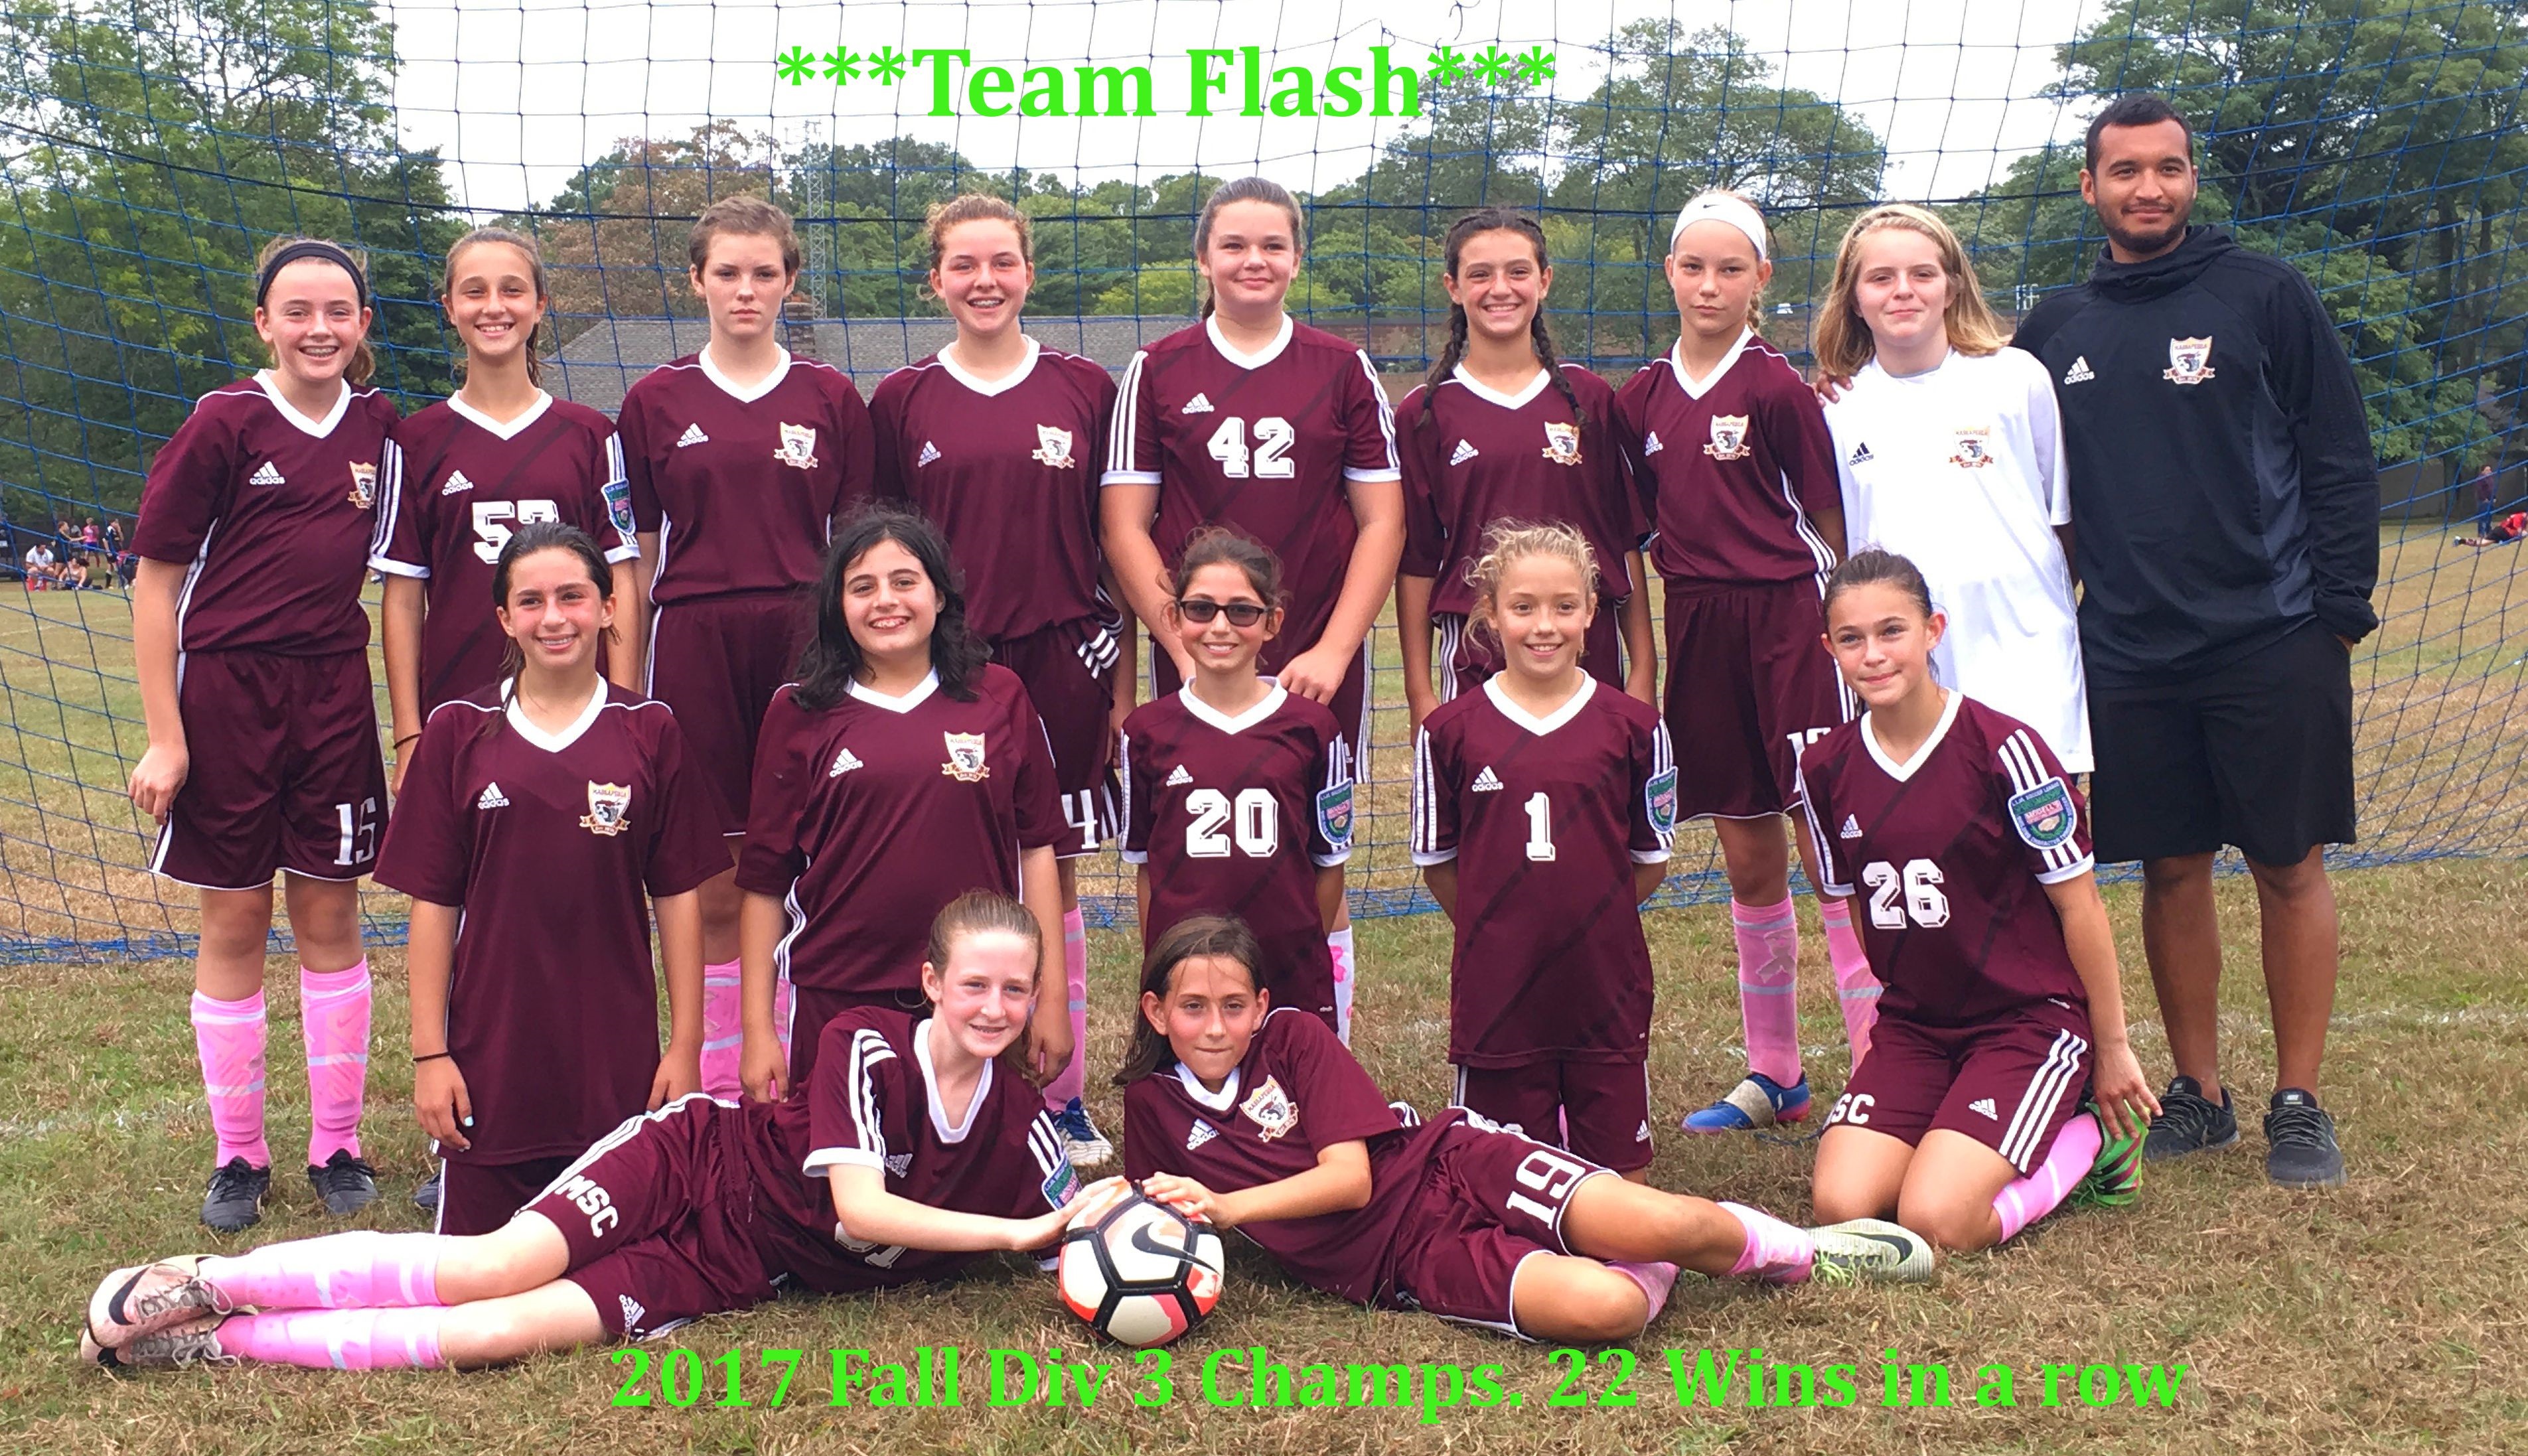 G2005 Flash 22 in a row & East Islip Tourney Title in '17!